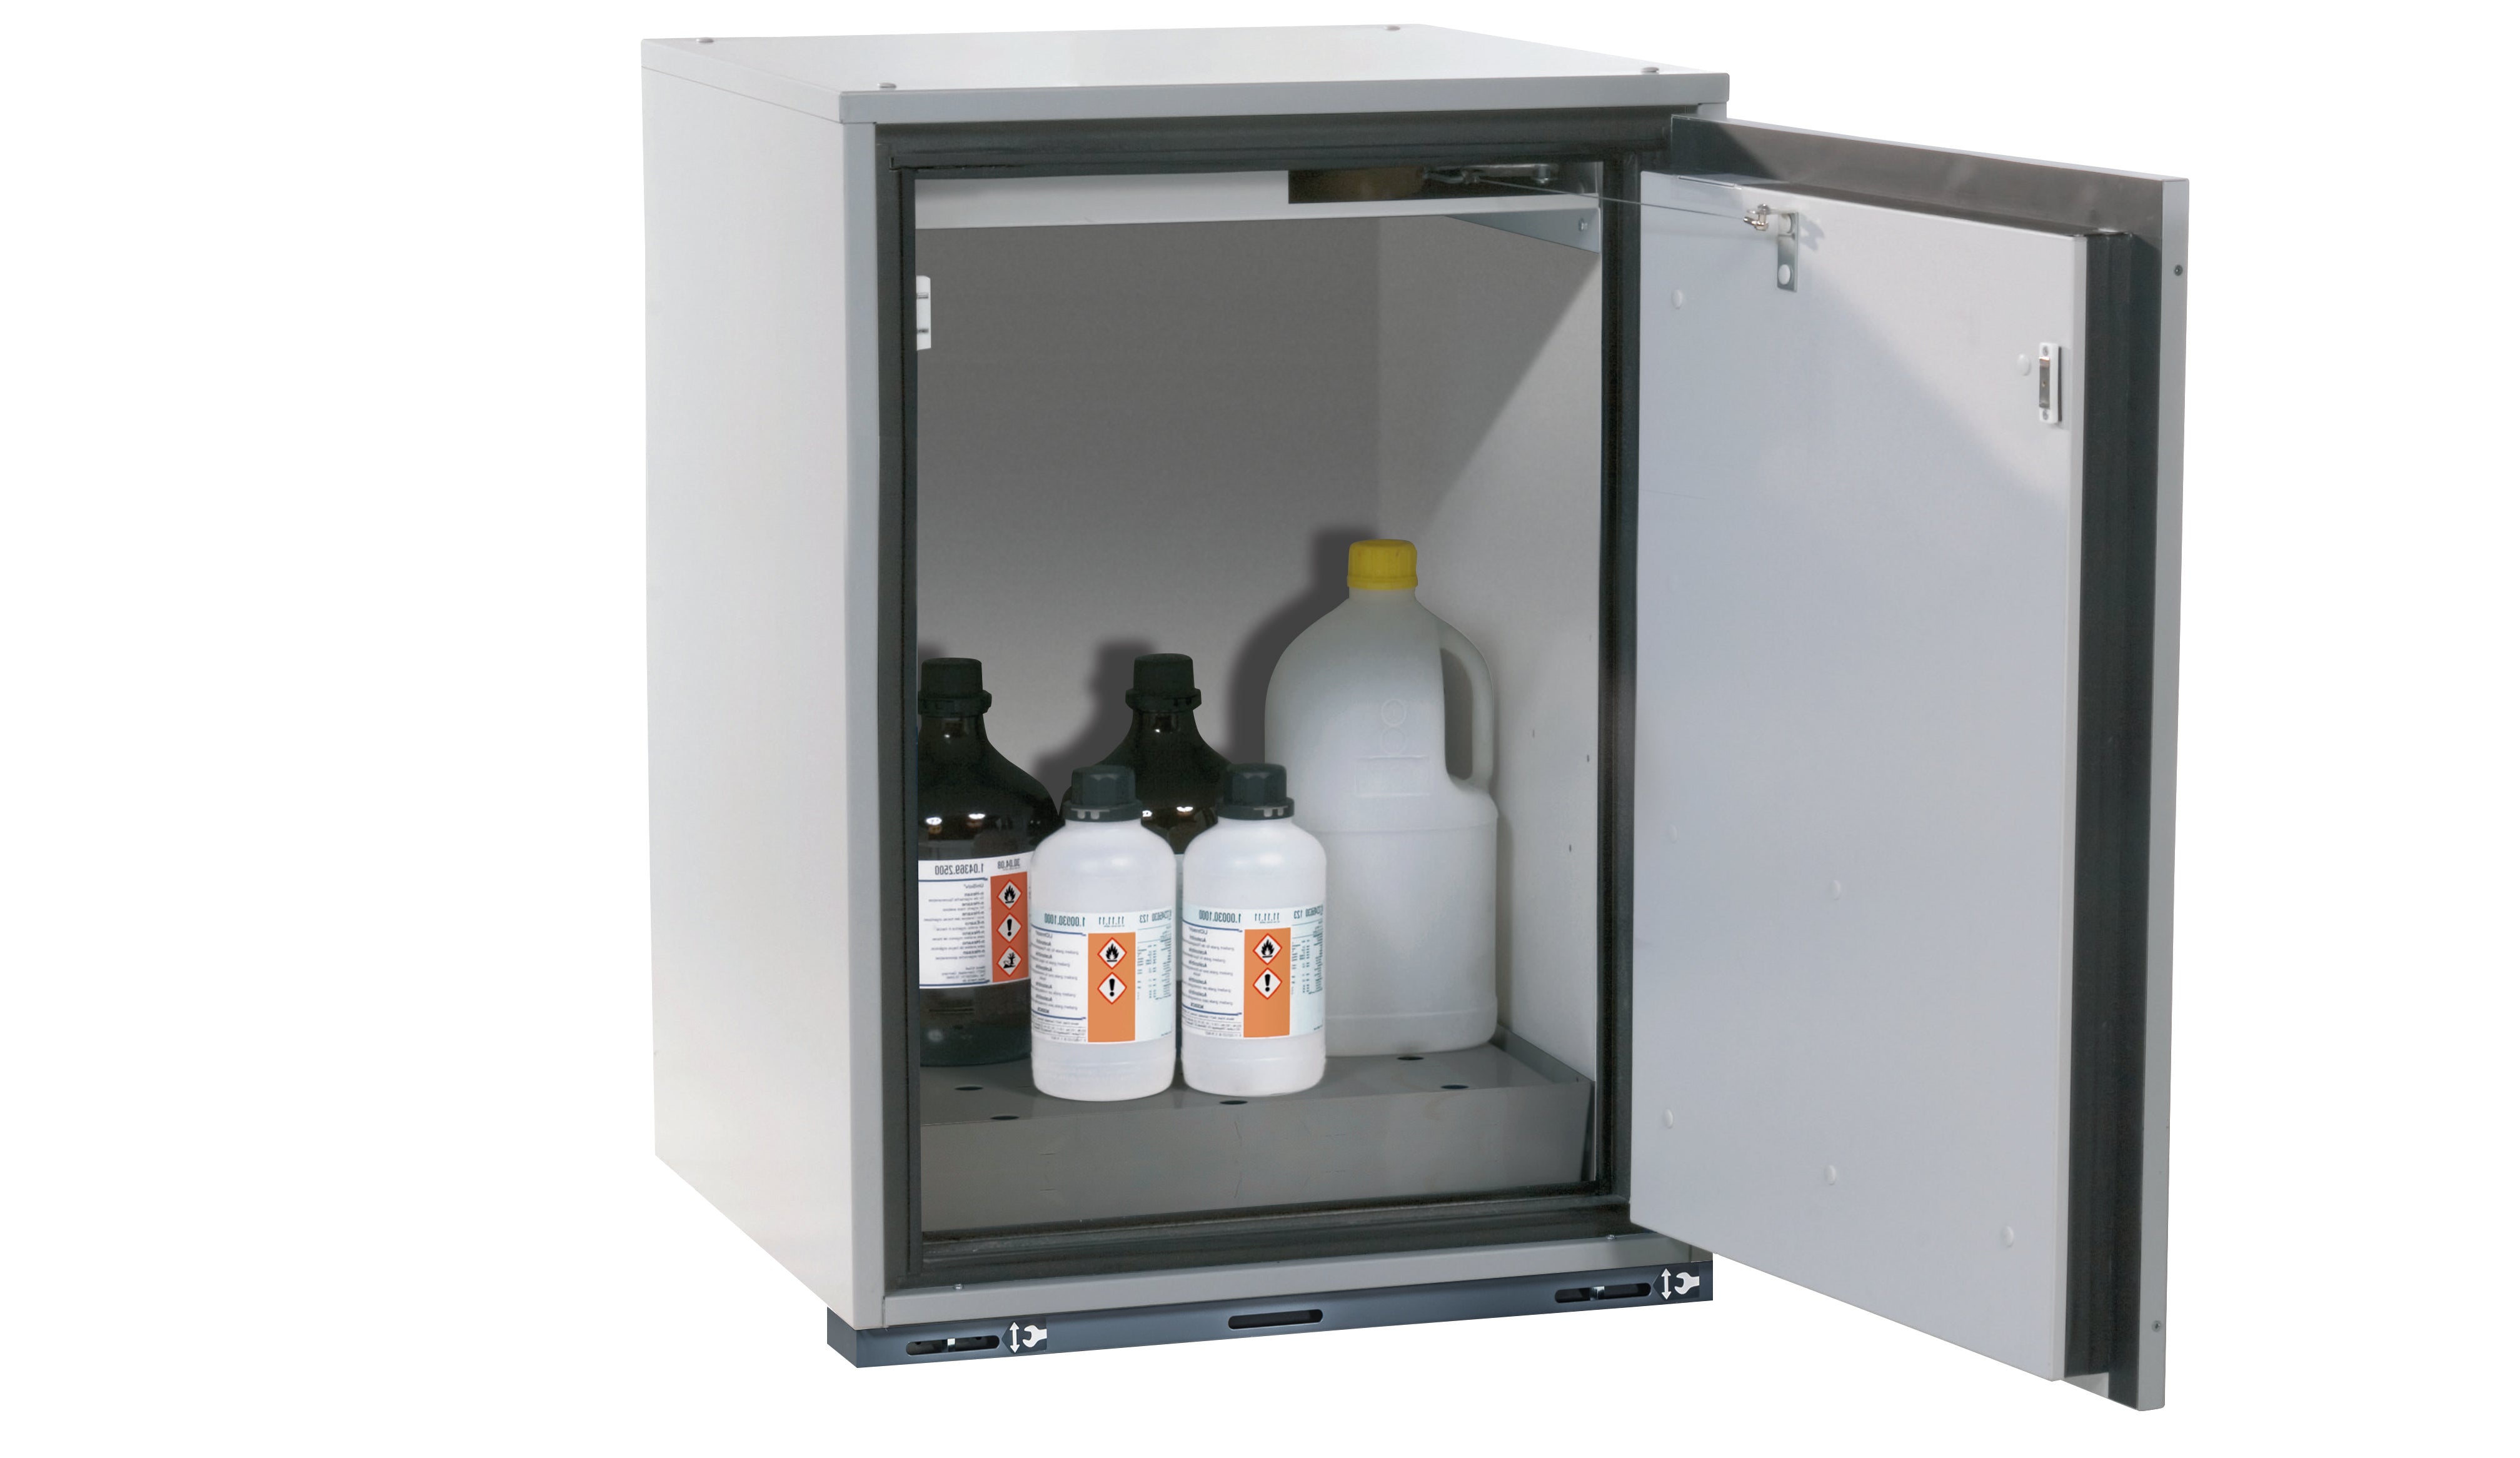 Type 90 safety base cabinet UB-T-90 model UB90.080.059.060.TR in light gray RAL 7035 with 1x perforated sheet metal insert standard (stainless steel 1.4016)